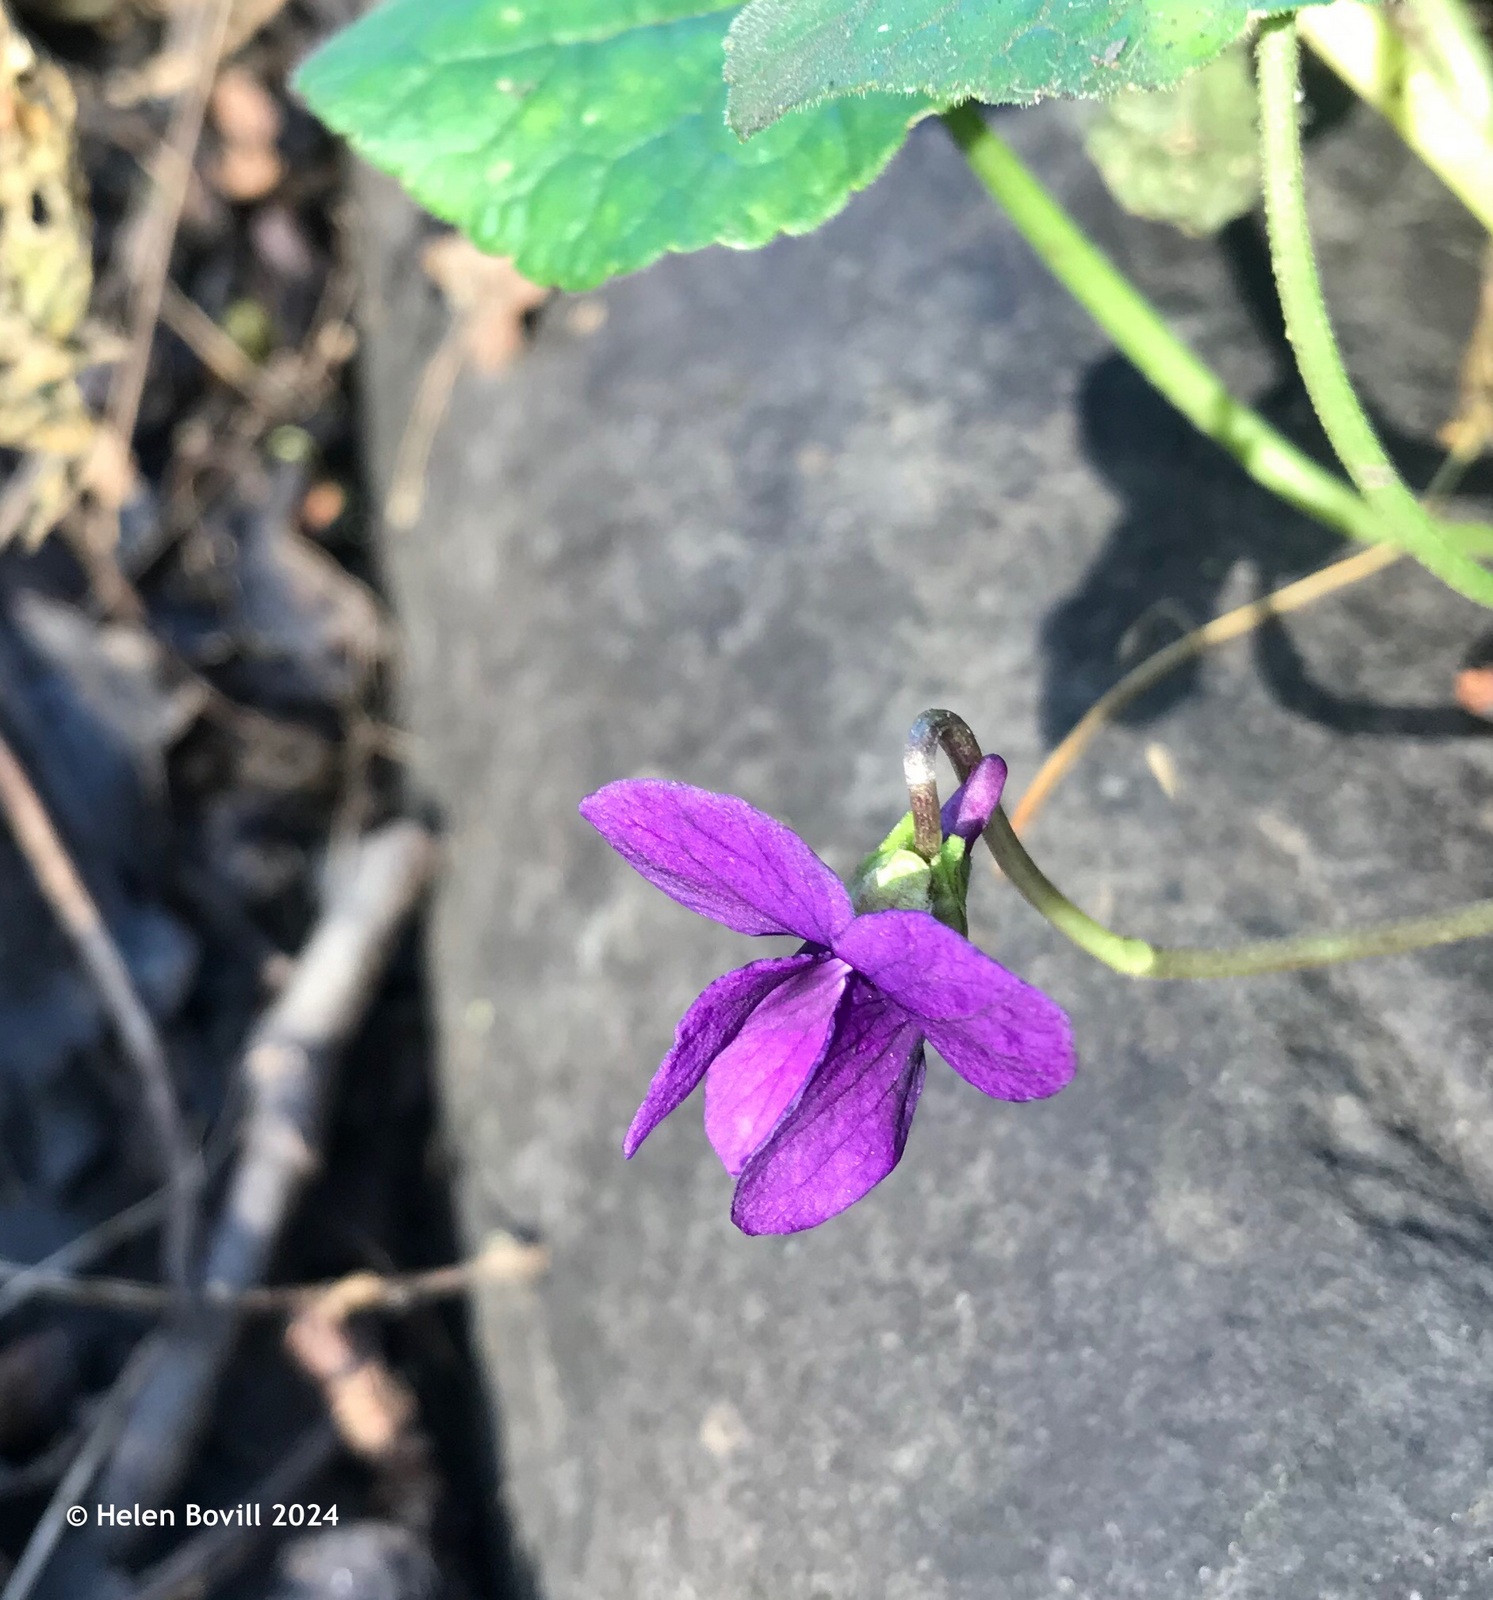 The small purple flower of the common dog-violet growing near a gravestone in the cemetery